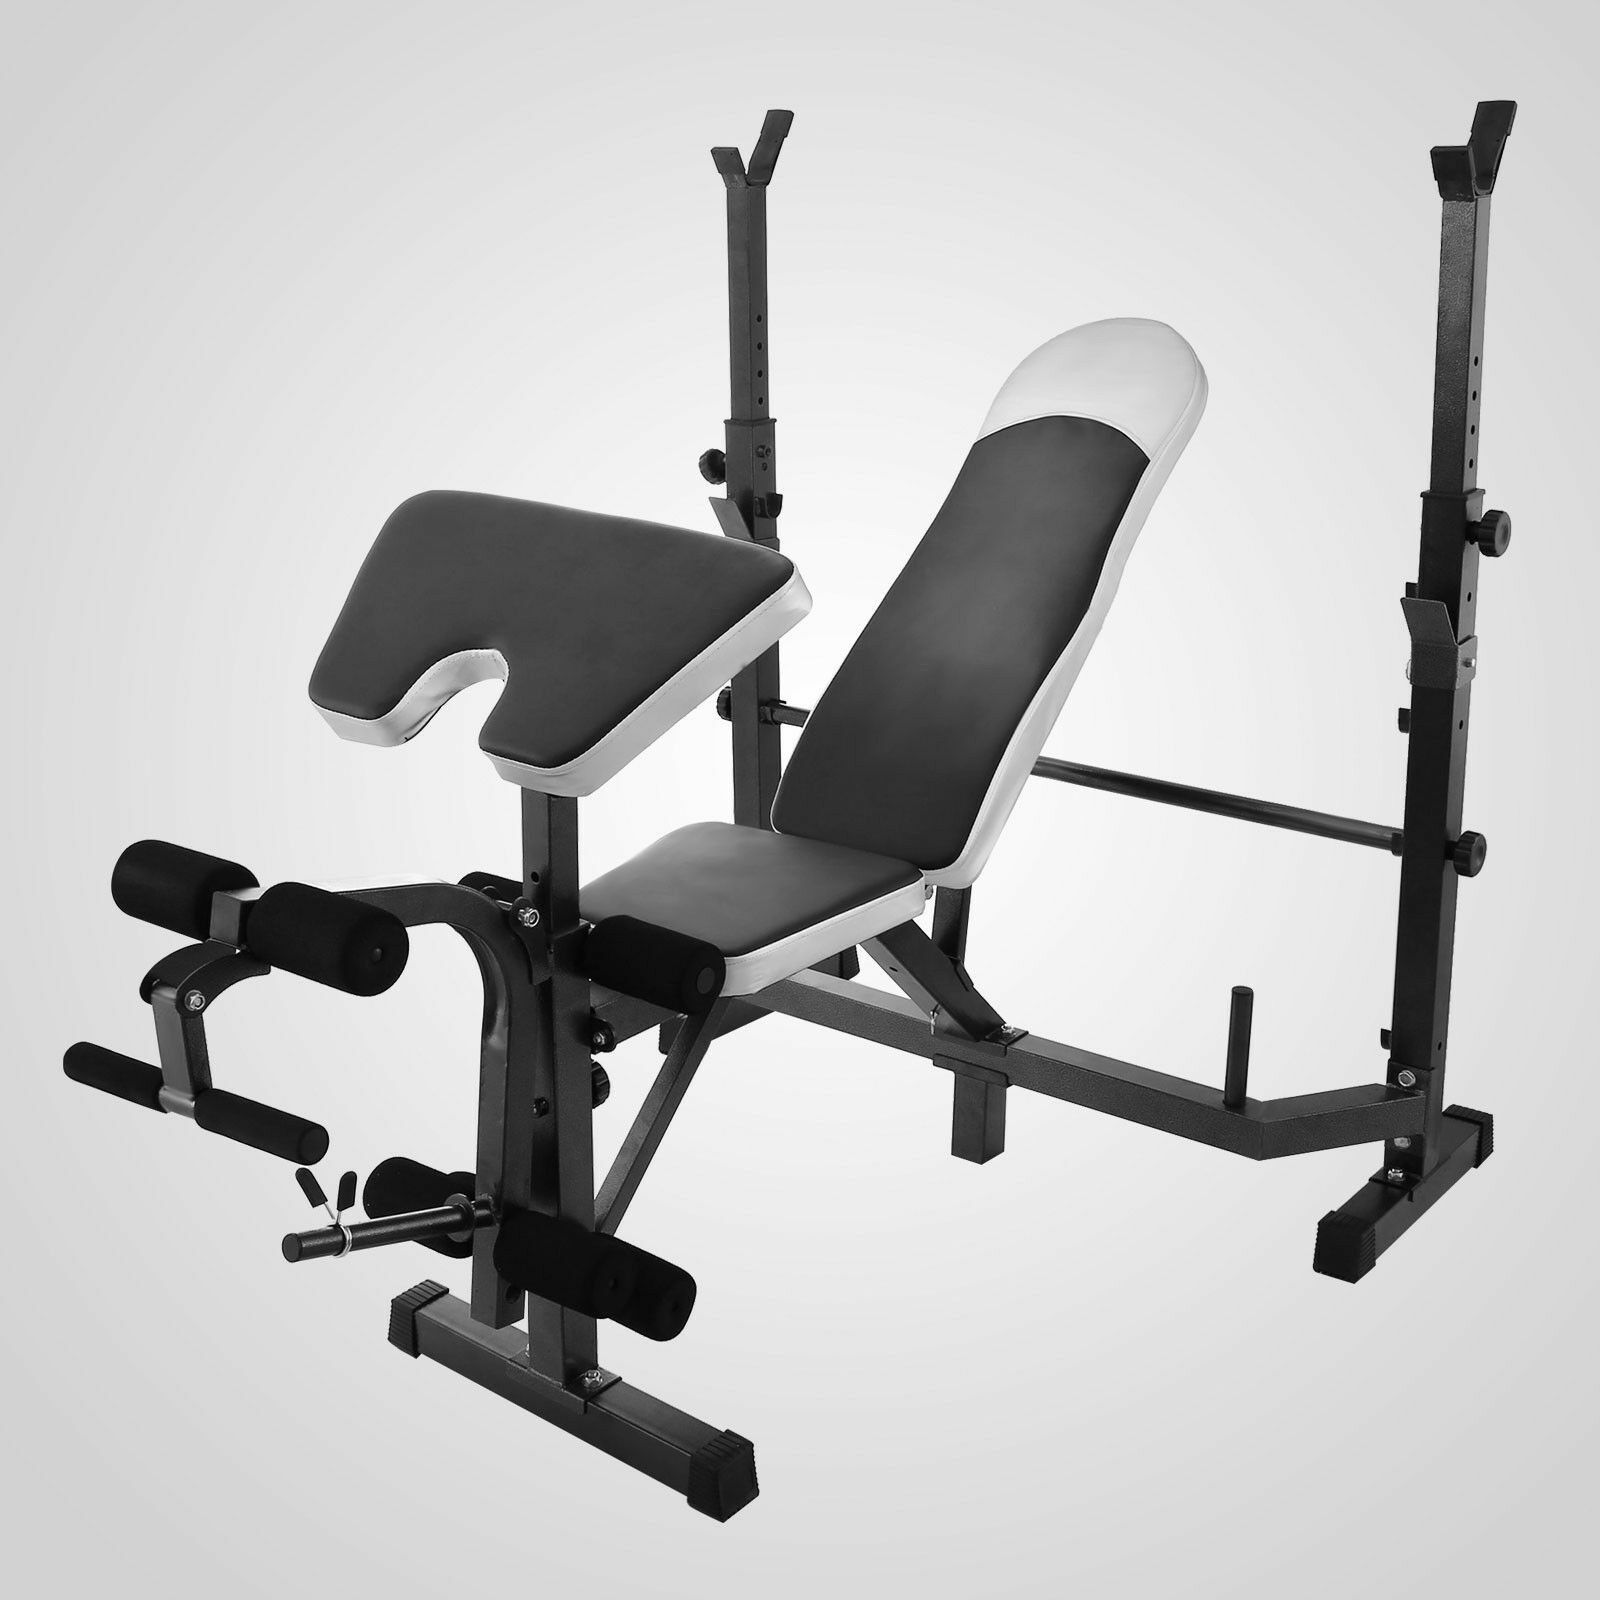 NEW Adjustable Weight Bench fits Olympic Press Lifting Barbell for Home Workout Backyard Exercise